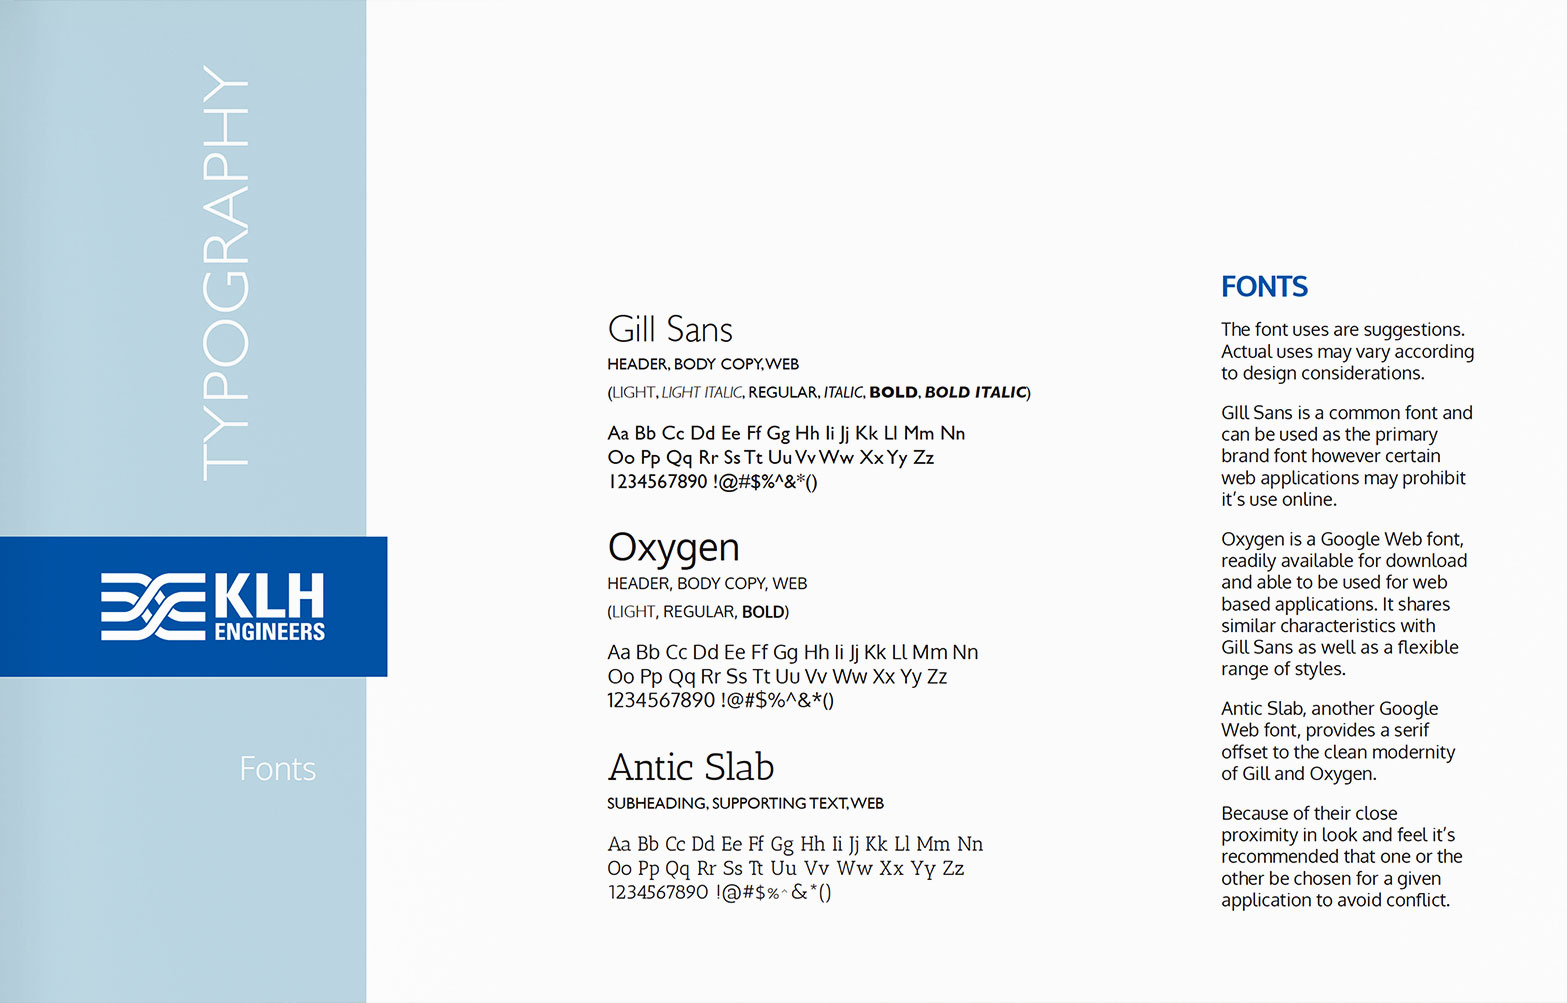 Typography - KLH Engineers Brand Guidelines